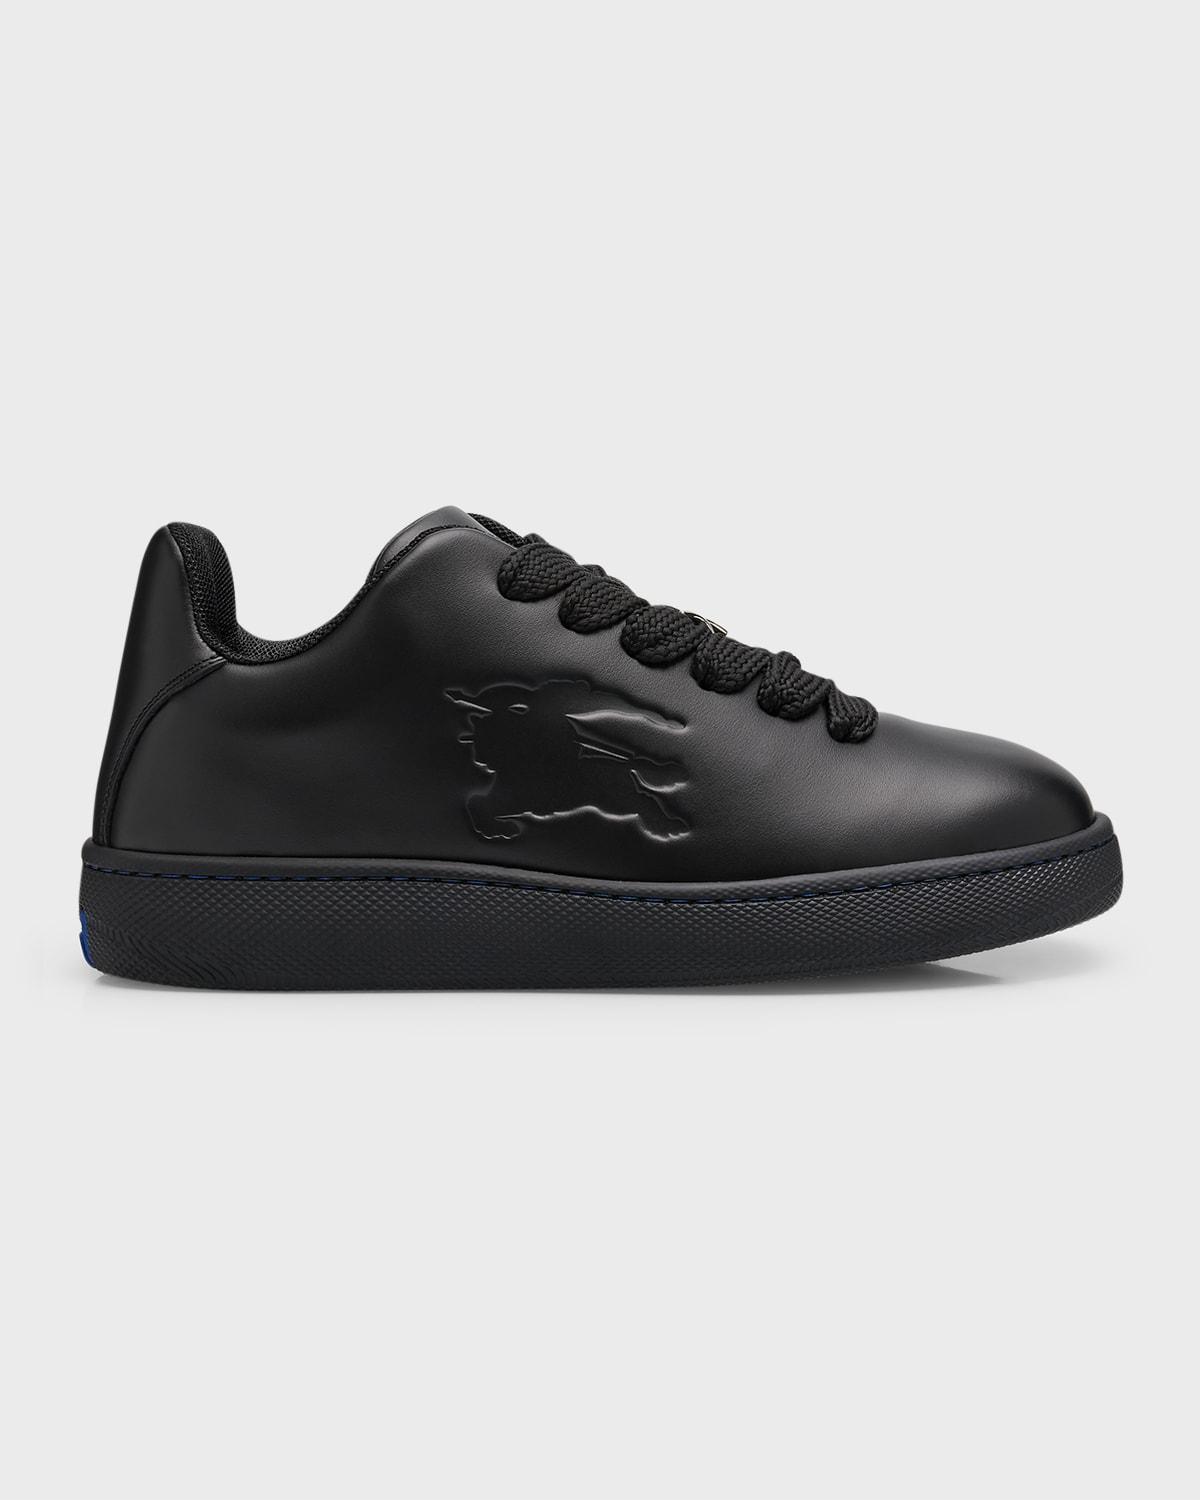 Mens MS25 Equestrian Knight Embossed Leather Low-Top Sneakers Product Image